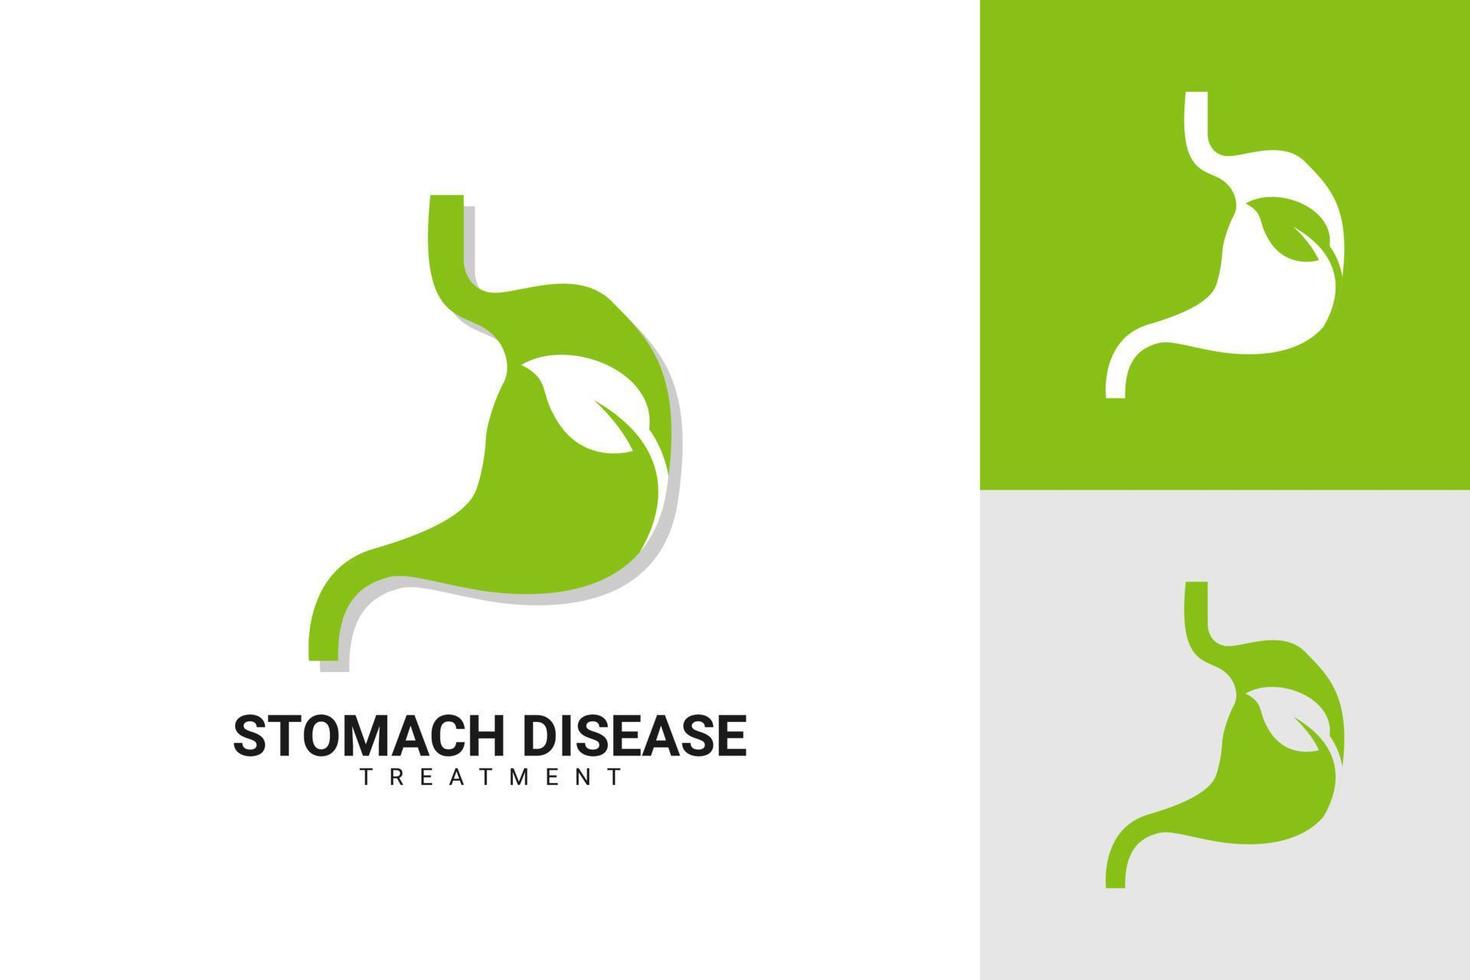 Illustration Vector Graphic of Stomach Disease Logo. Perfect to use for Medical Company